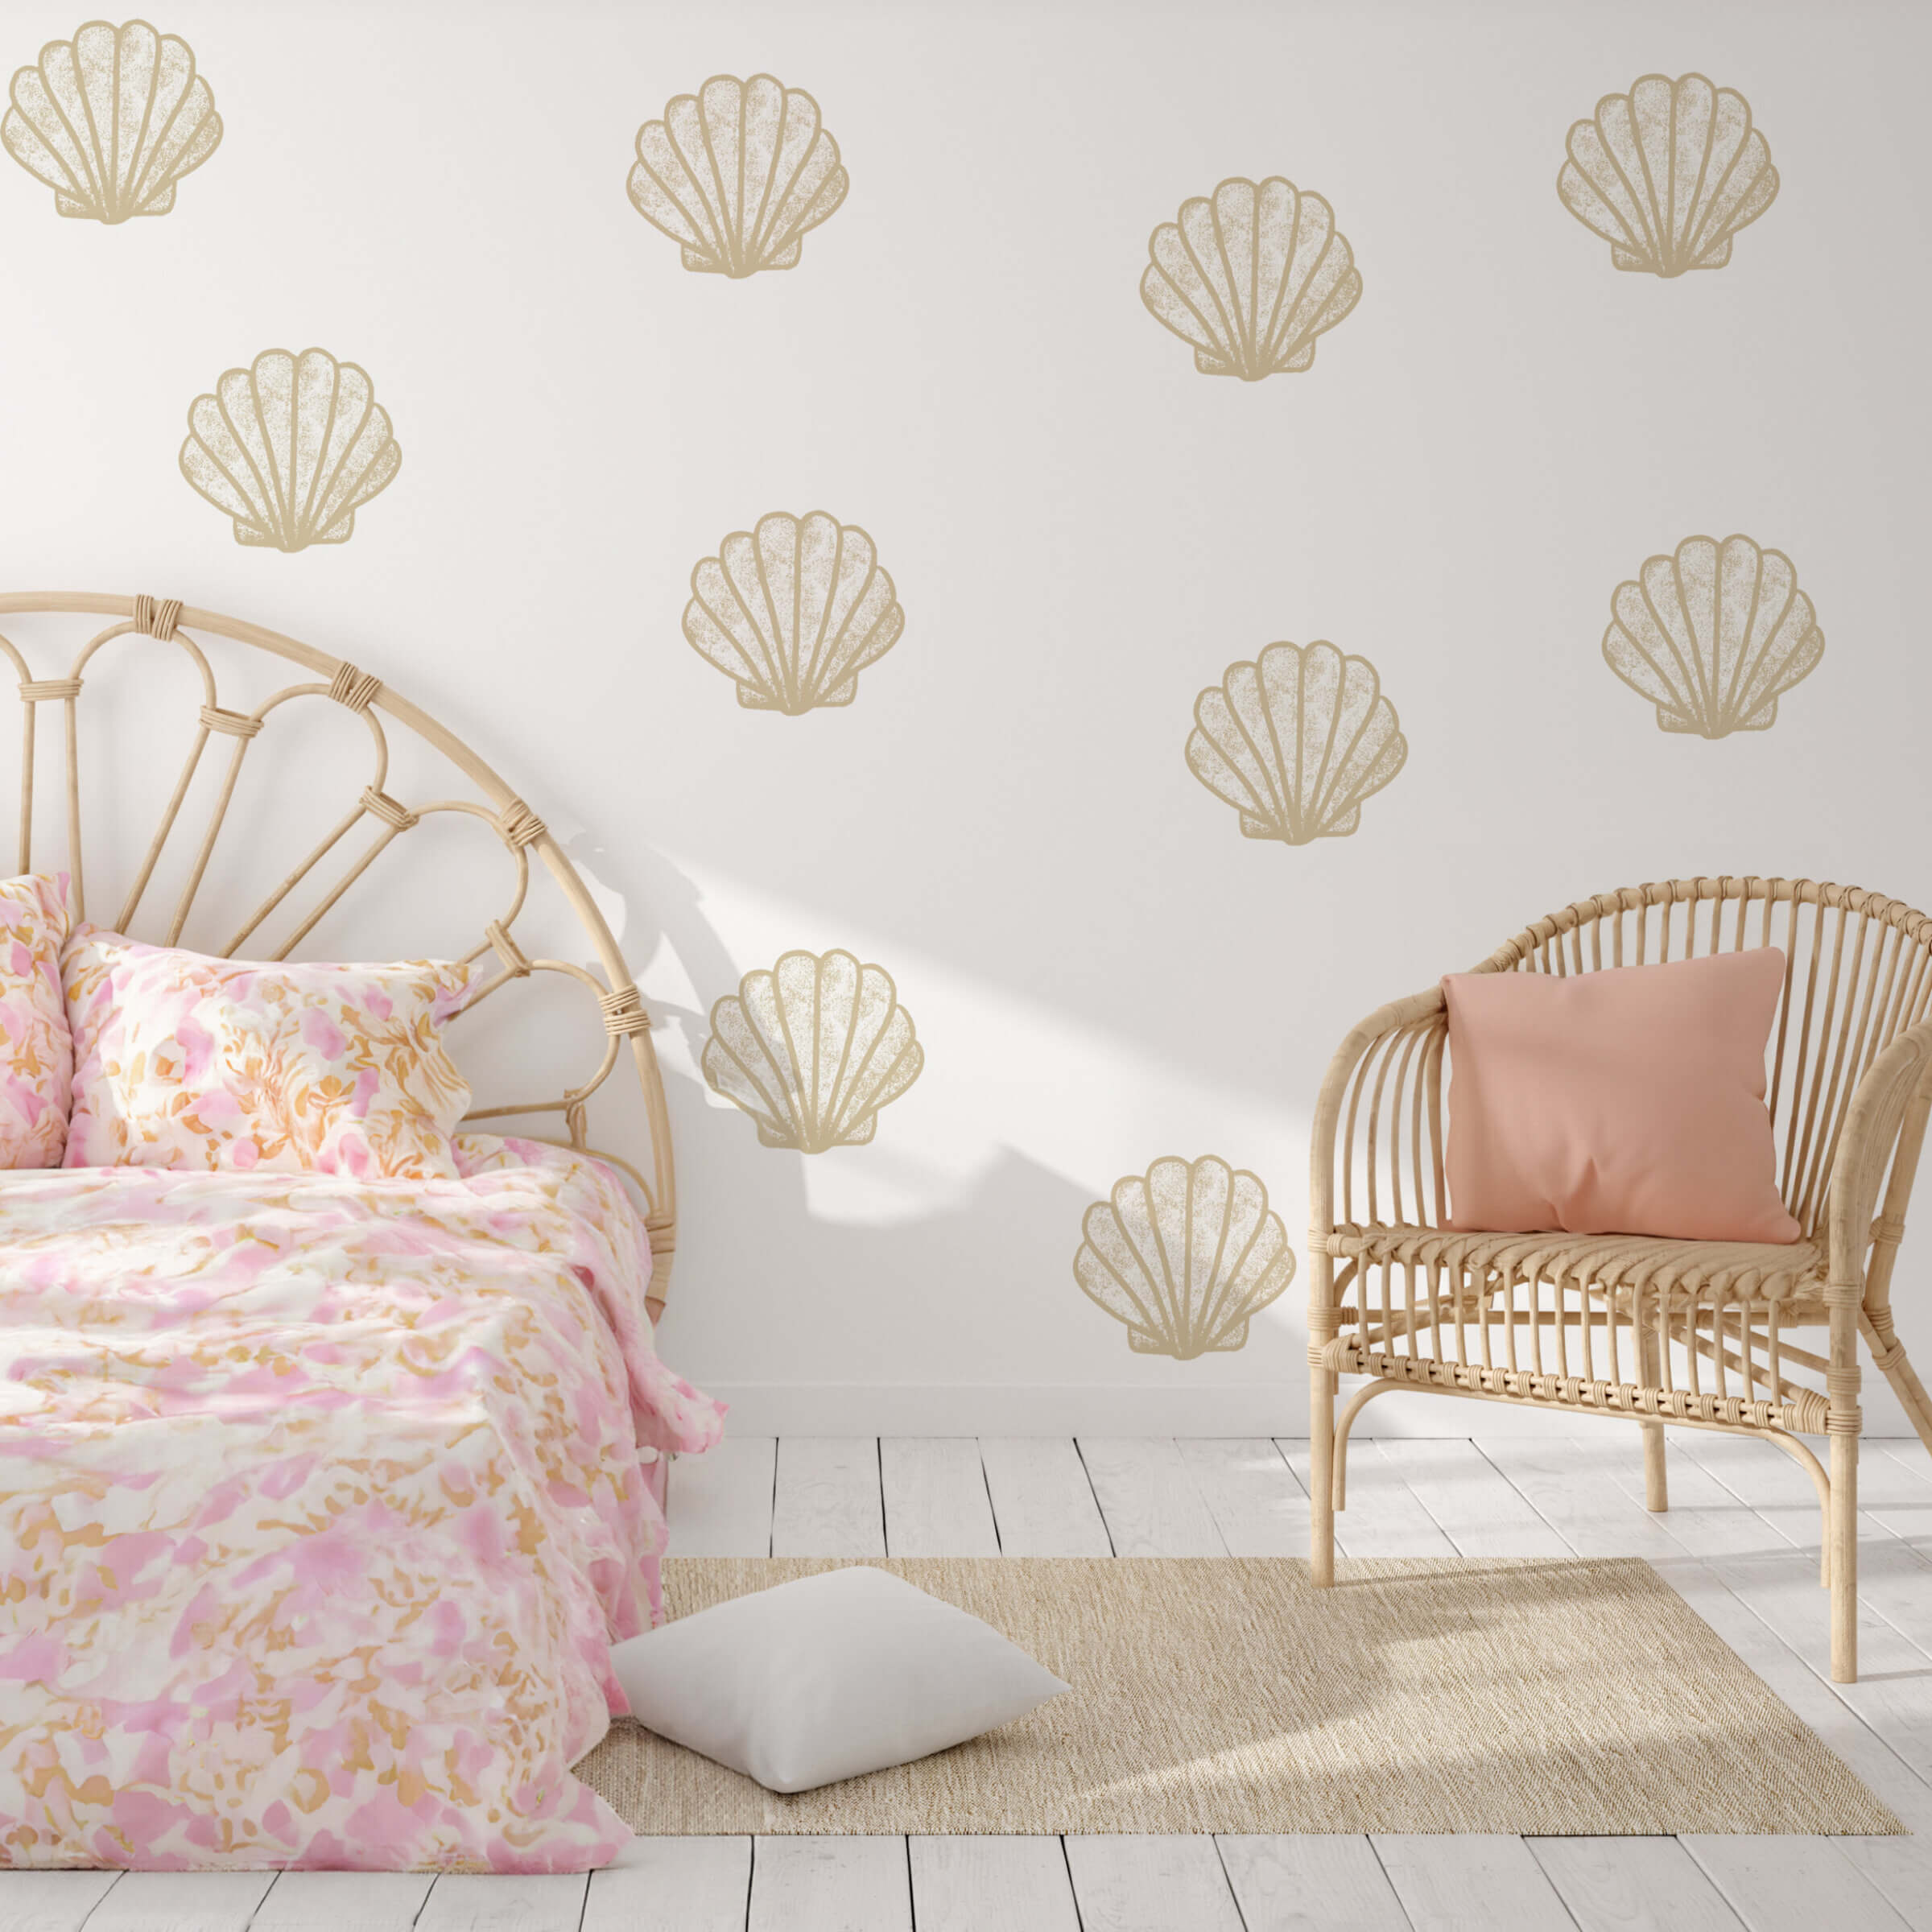 Seashell Decals Large Sand